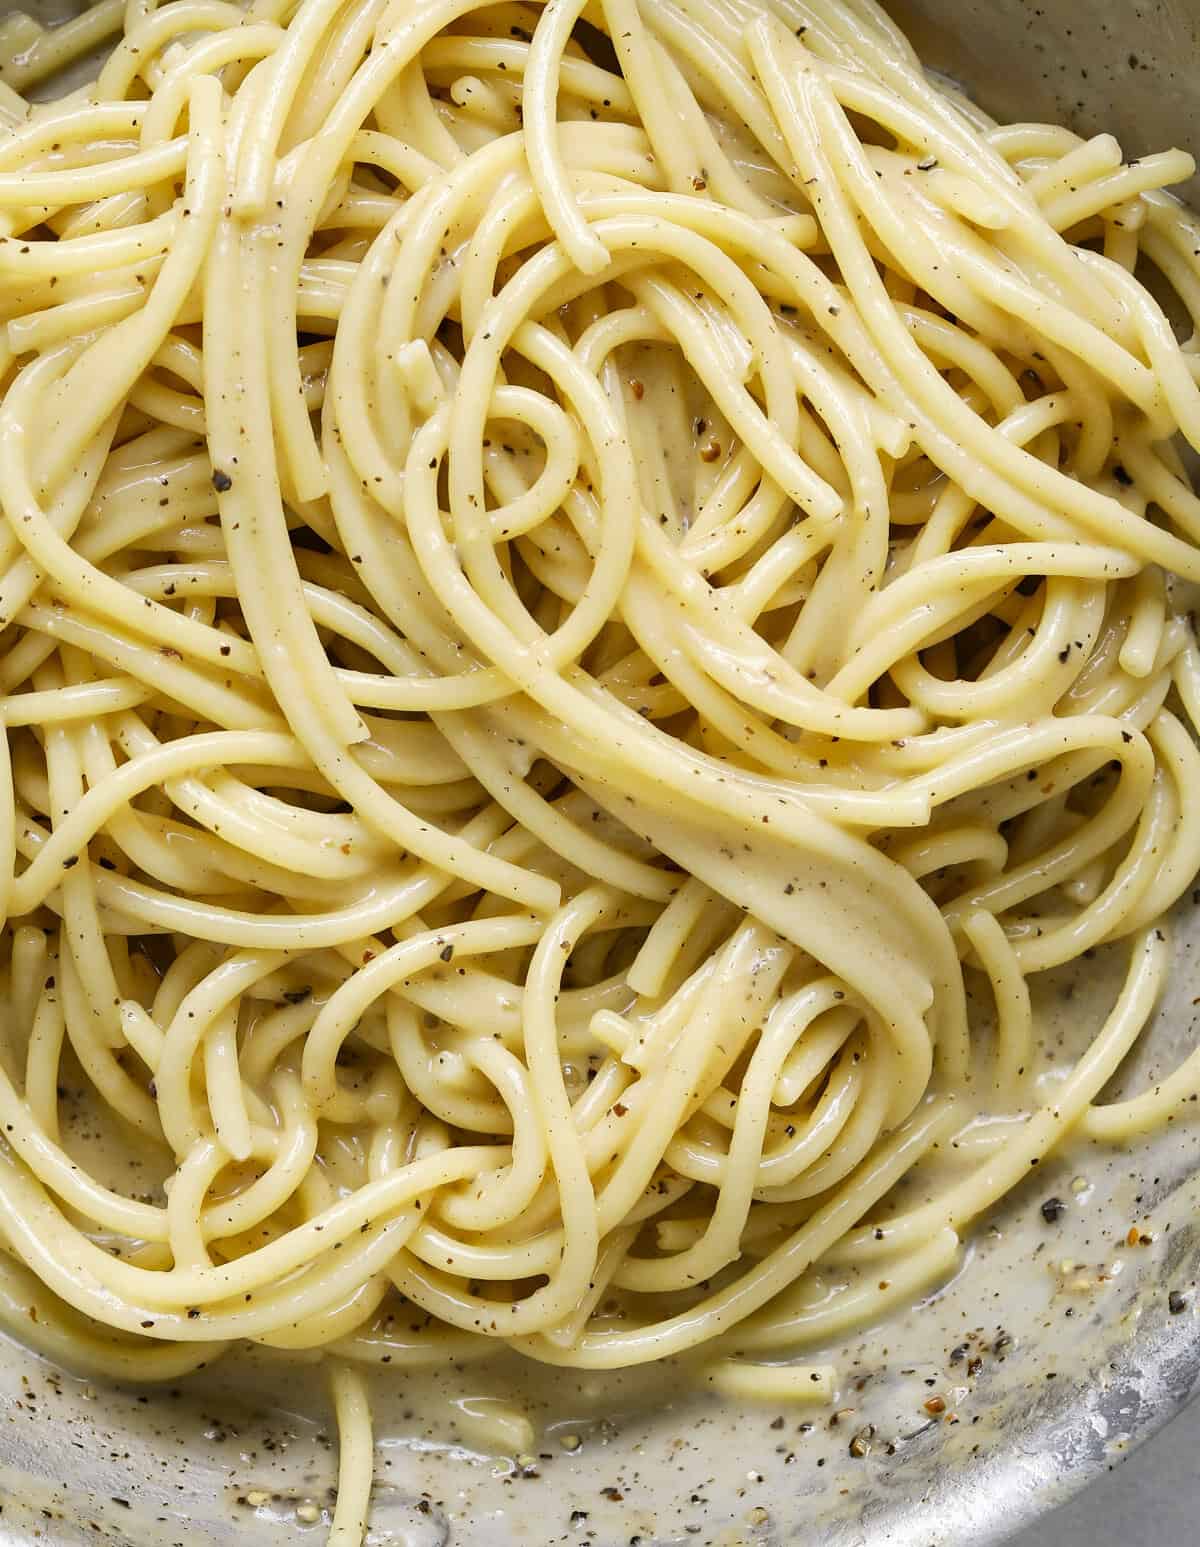 A close up image of pasta with black pepper in a sauce pan.